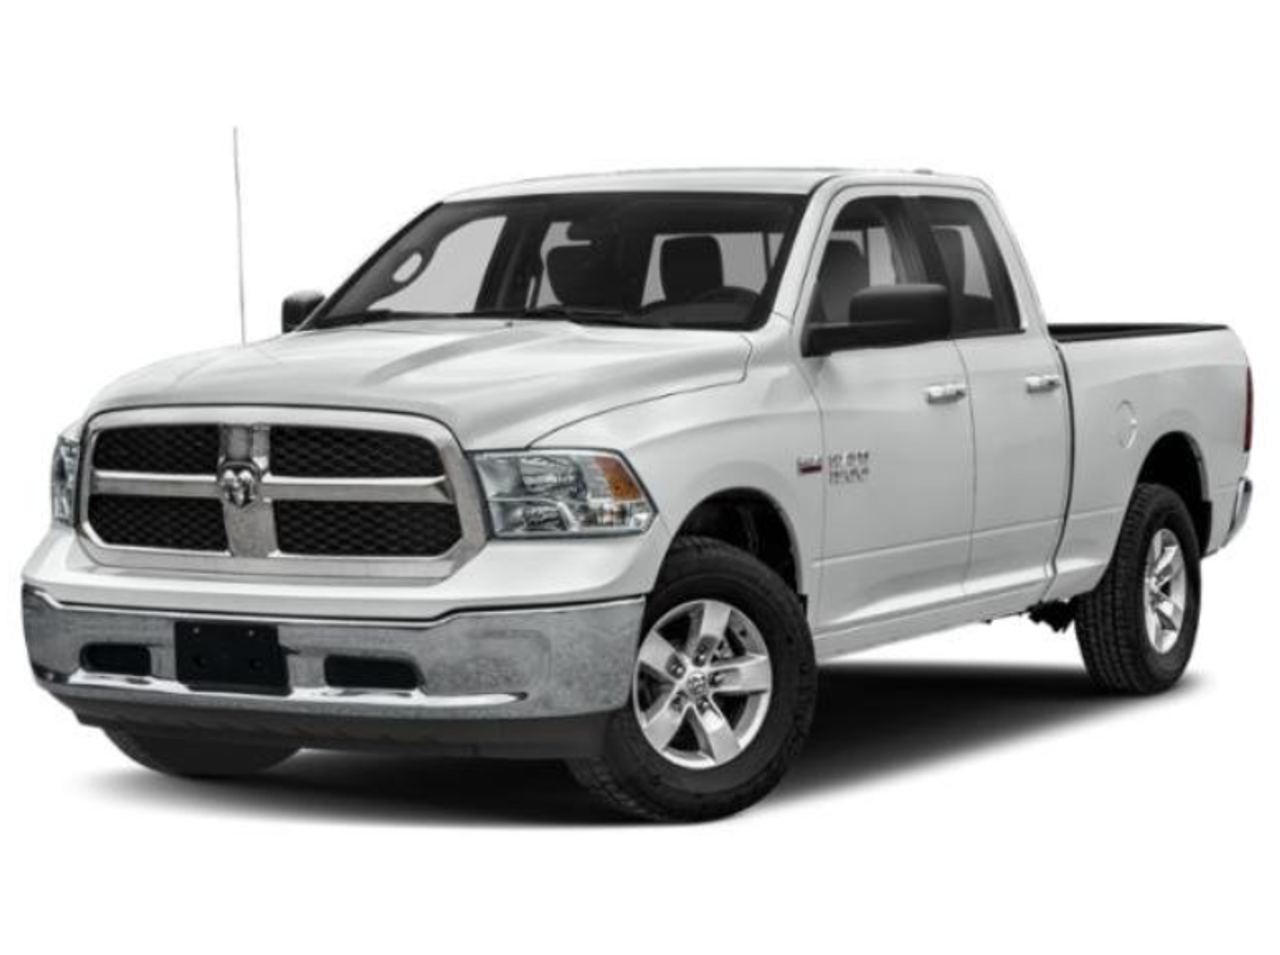 New 2023 White Dodge Ram 1500 SSV 4x4 Truck, ready to be built as an Admin Package (Emergency Lighting, Siren, Controller,  Console, Partition, Window Bars, etc.), + Delivery, 23RAMMP2